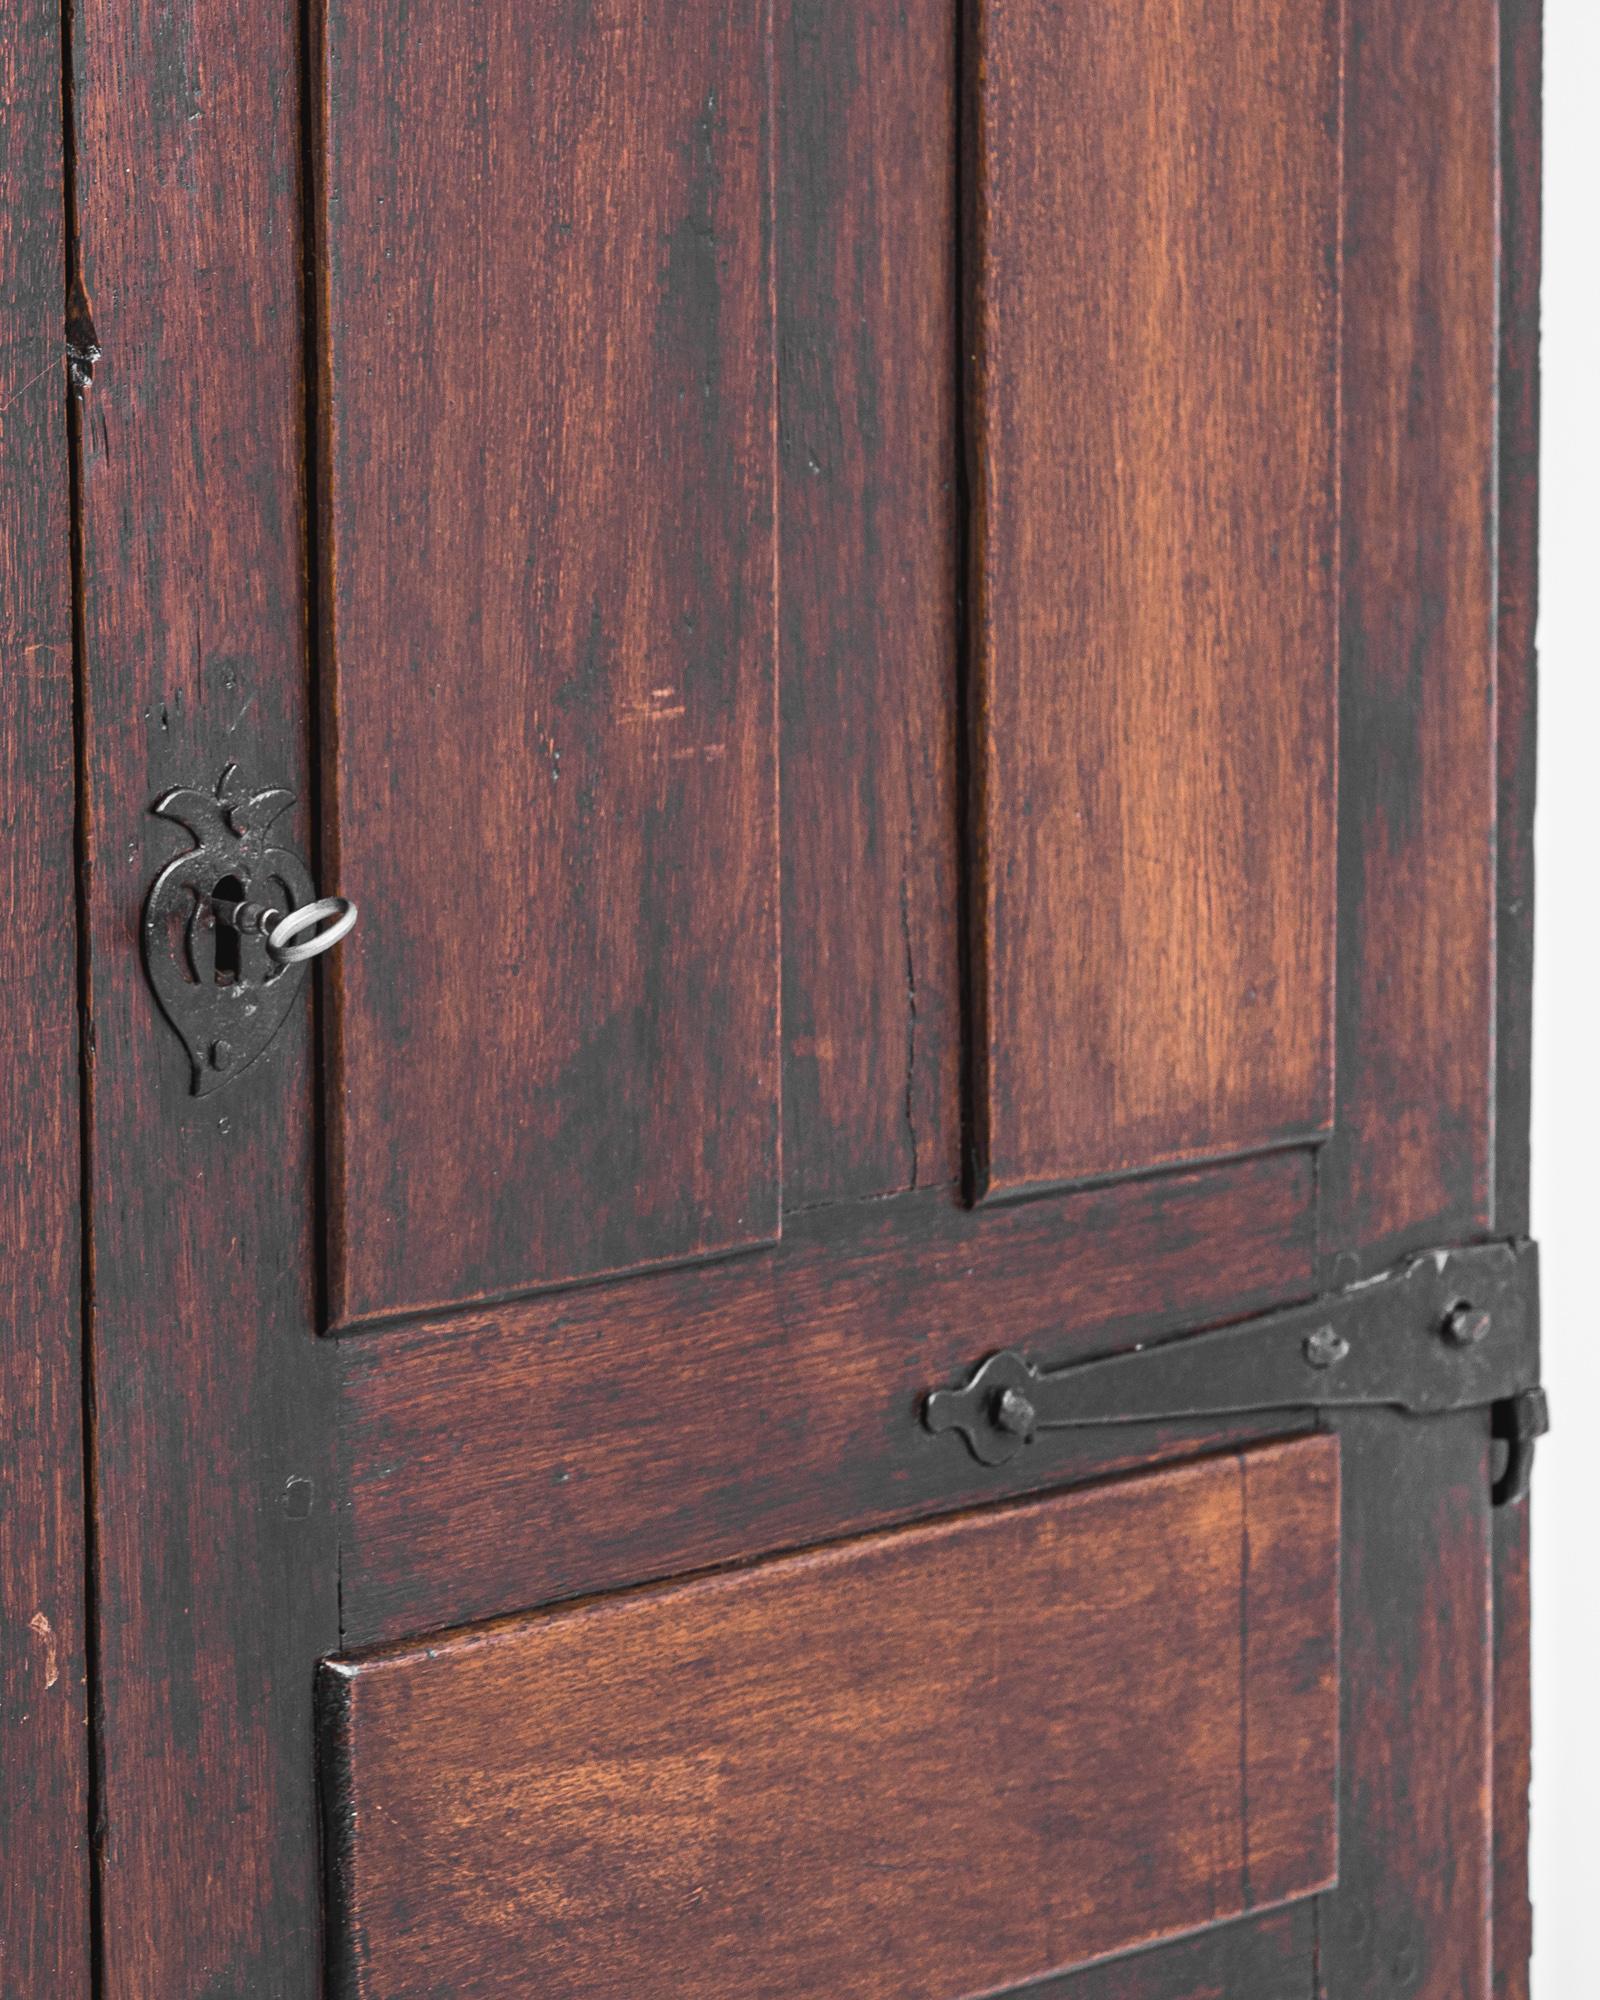 A wooden cabinet from Spain, produced circa 1800. At a height of six and a half feet, this antique features a double door upper cabinet hanging from heavy iron hinges and two sliding drawers with dangling pulls, all coated in a dark stain that gives